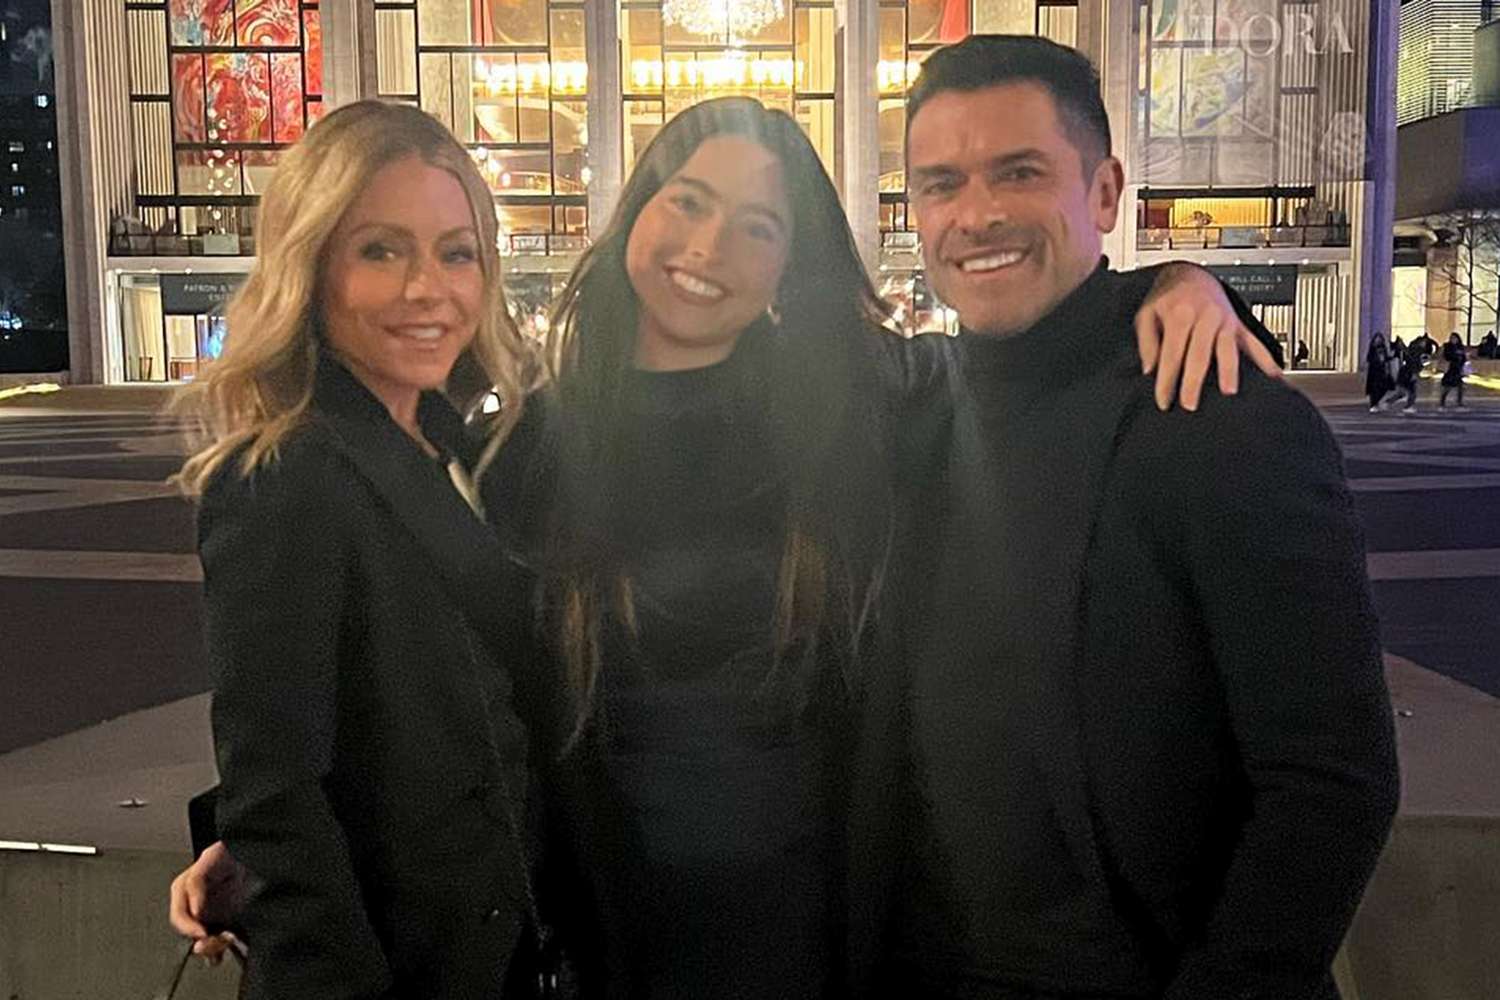 Kelly Ripa and Mark Consuelos Have a Sweet Reunion with Their On-Screen Baby from All My Children